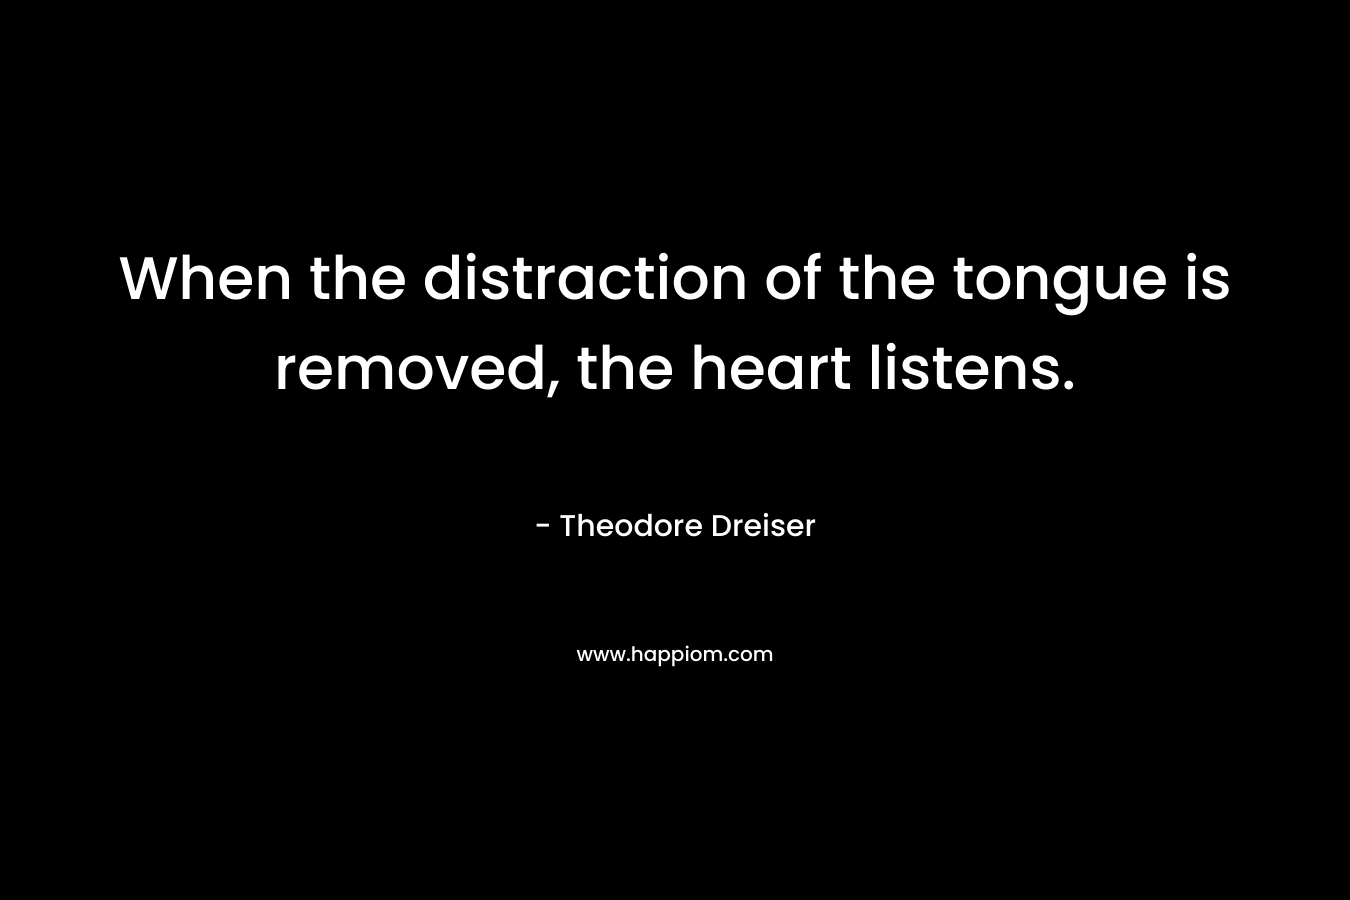 When the distraction of the tongue is removed, the heart listens.